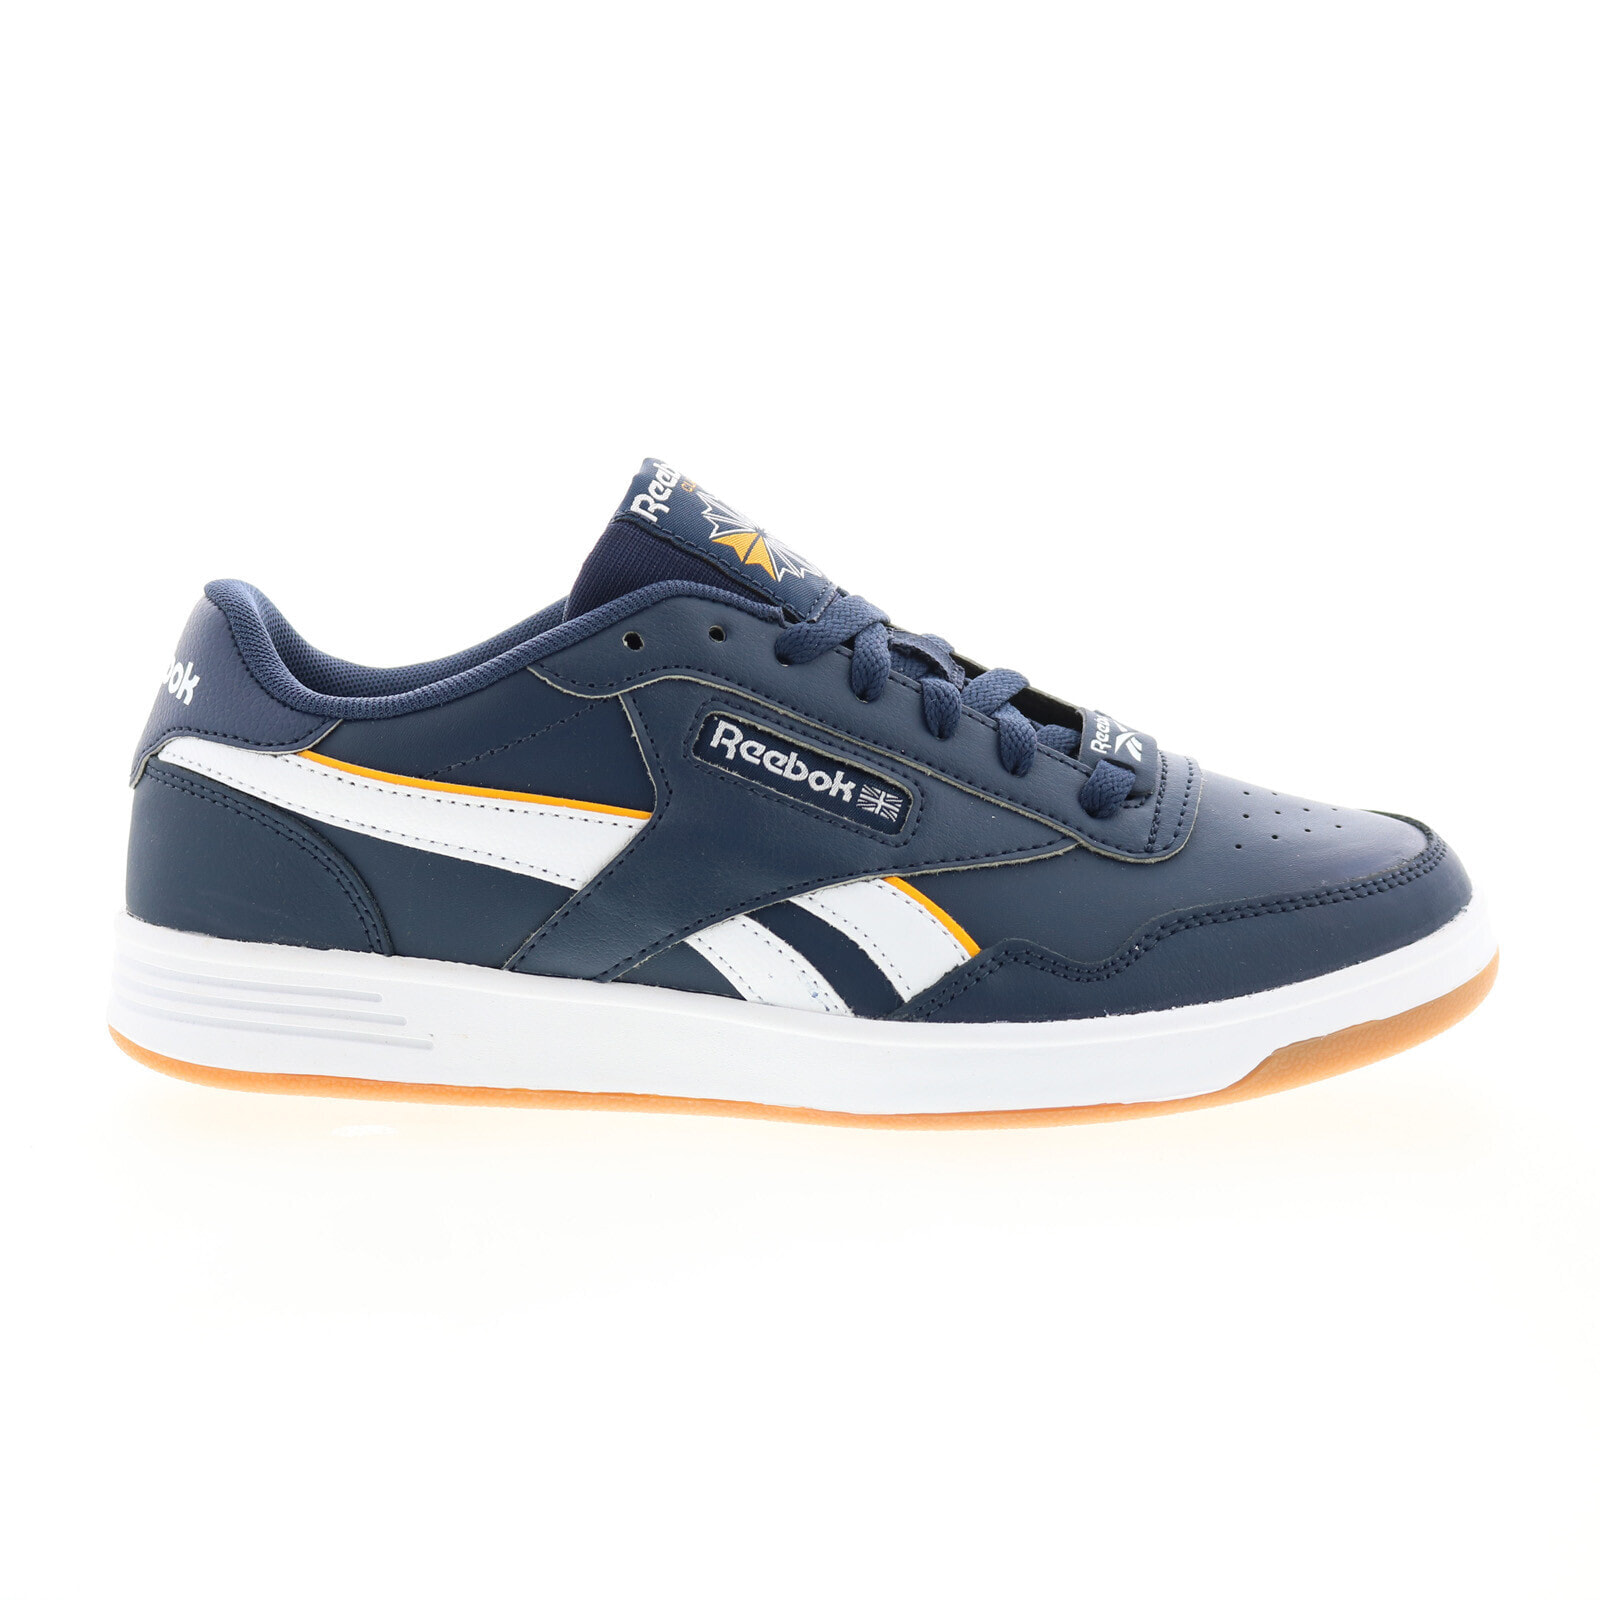 Reebok Club Memt GY1854 Mens Blue Leather Lifestyle Sneakers Shoes